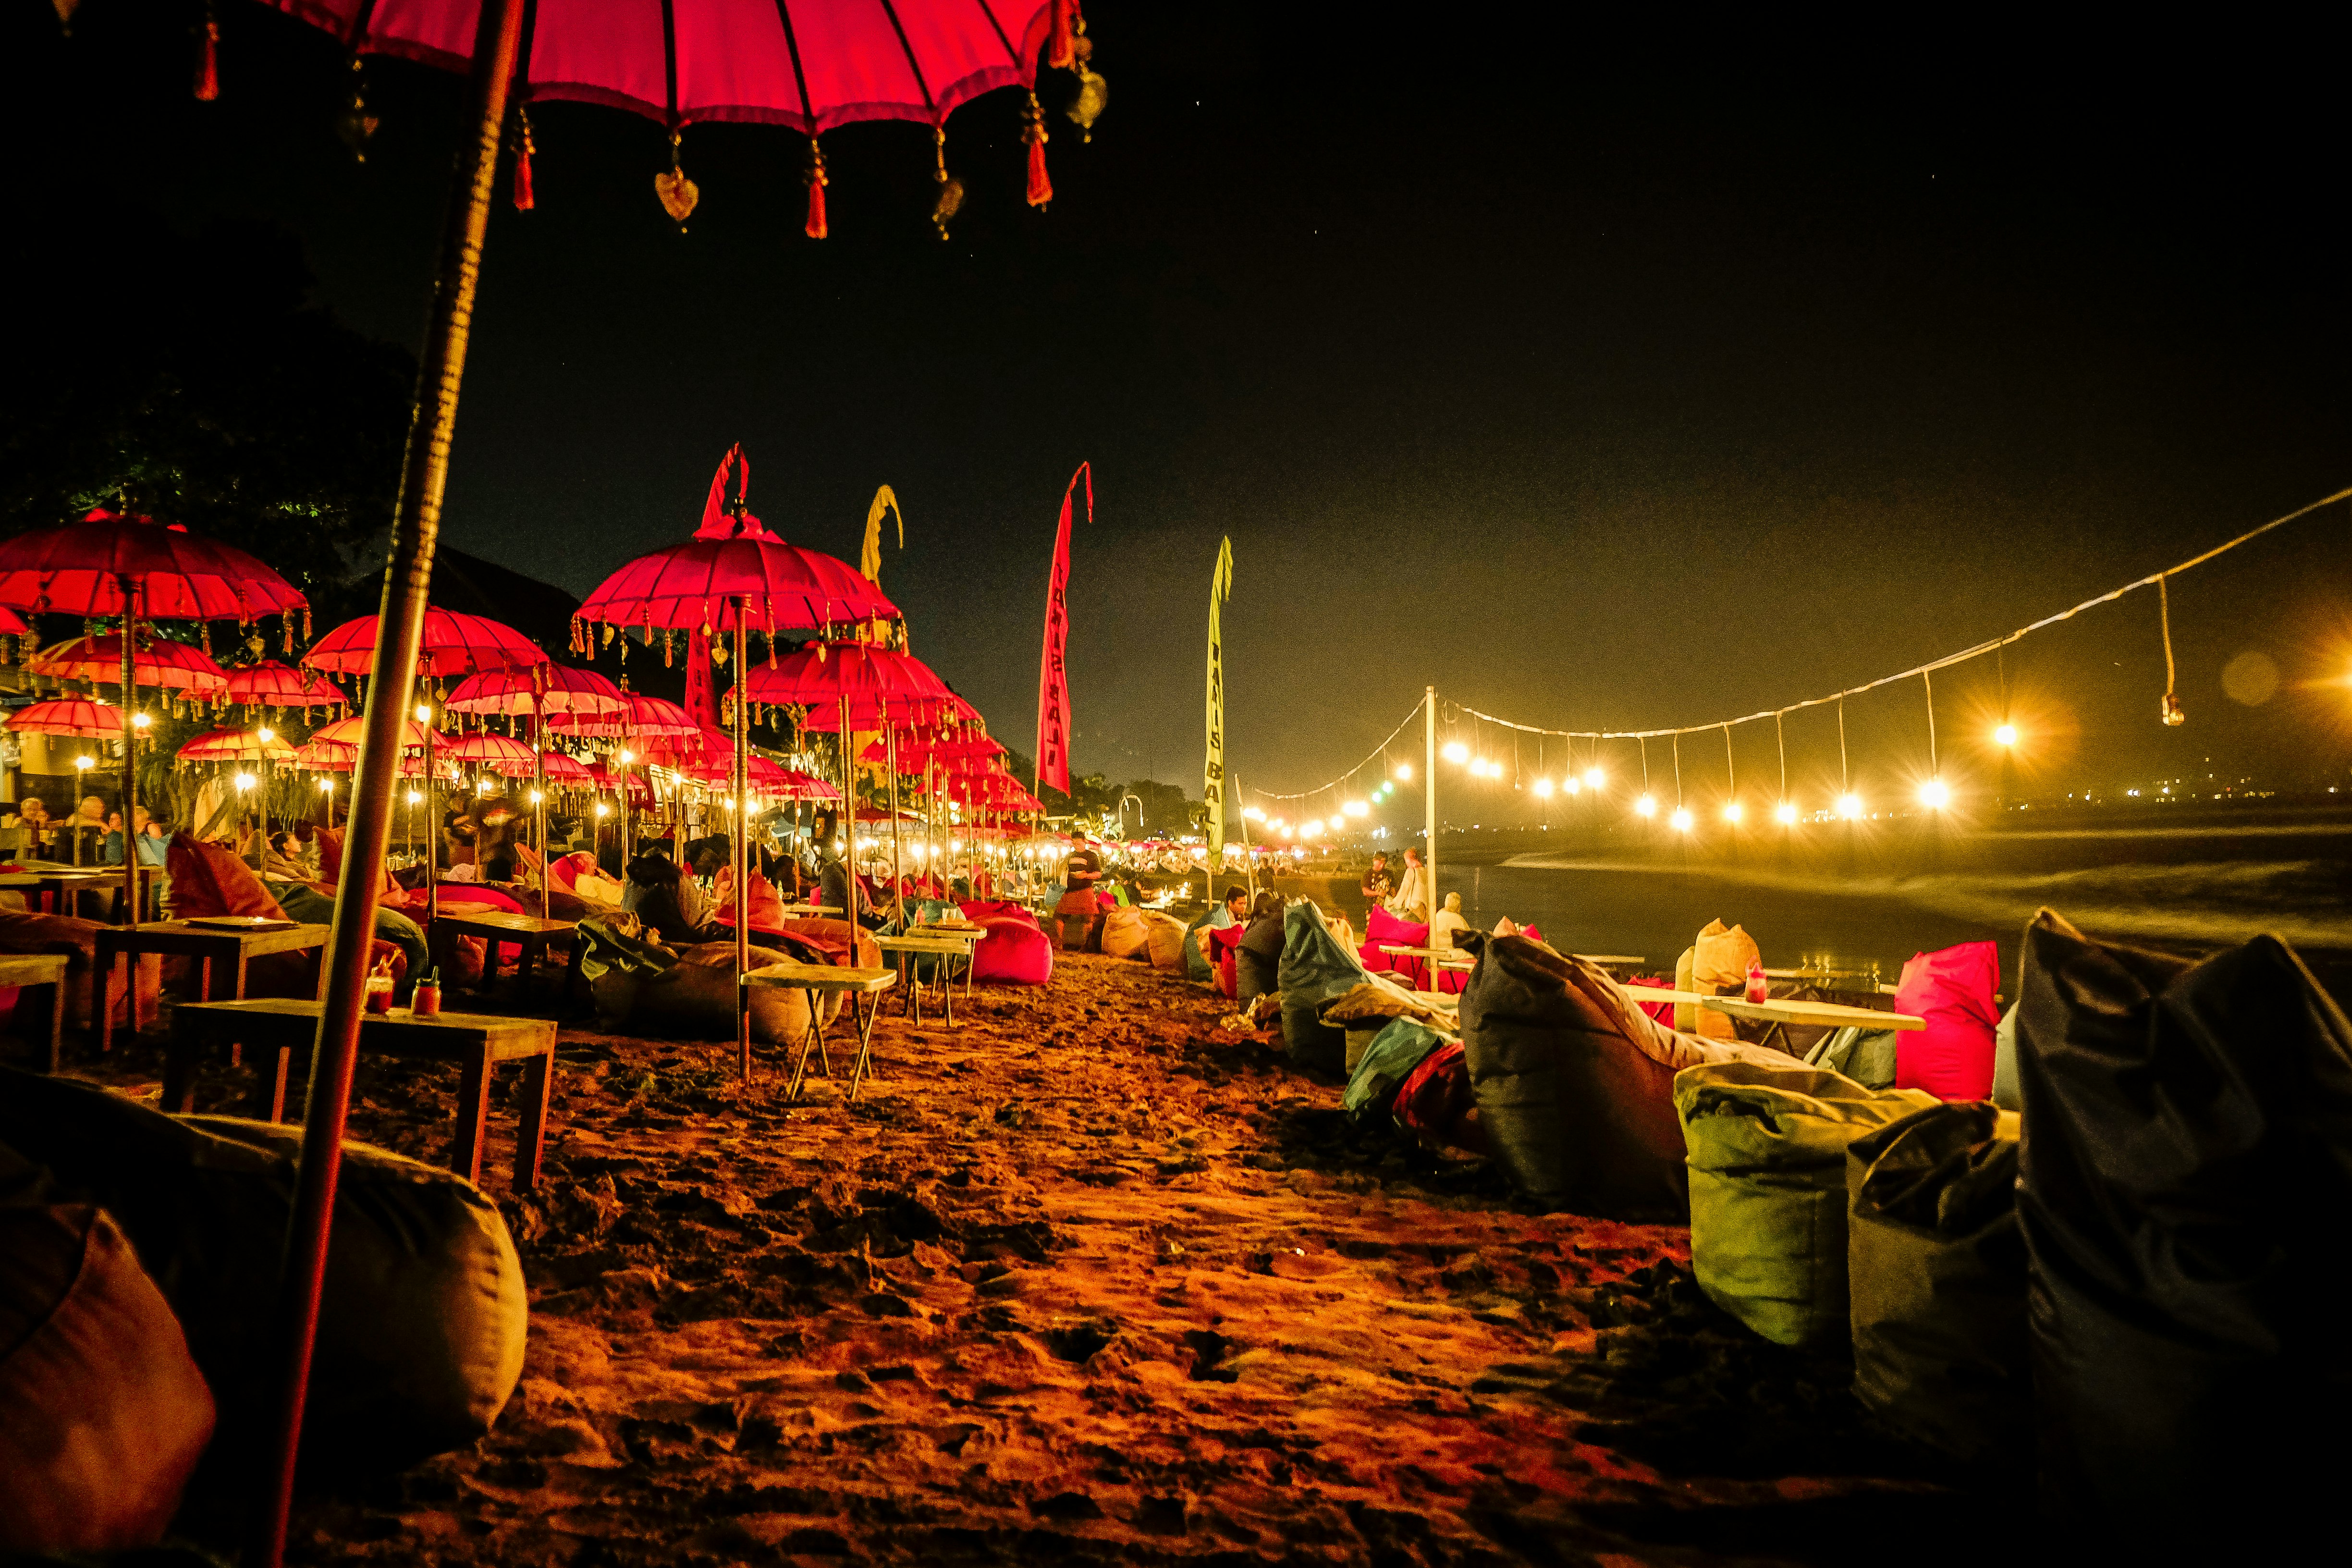 red umbrellas and yellow lights on shore